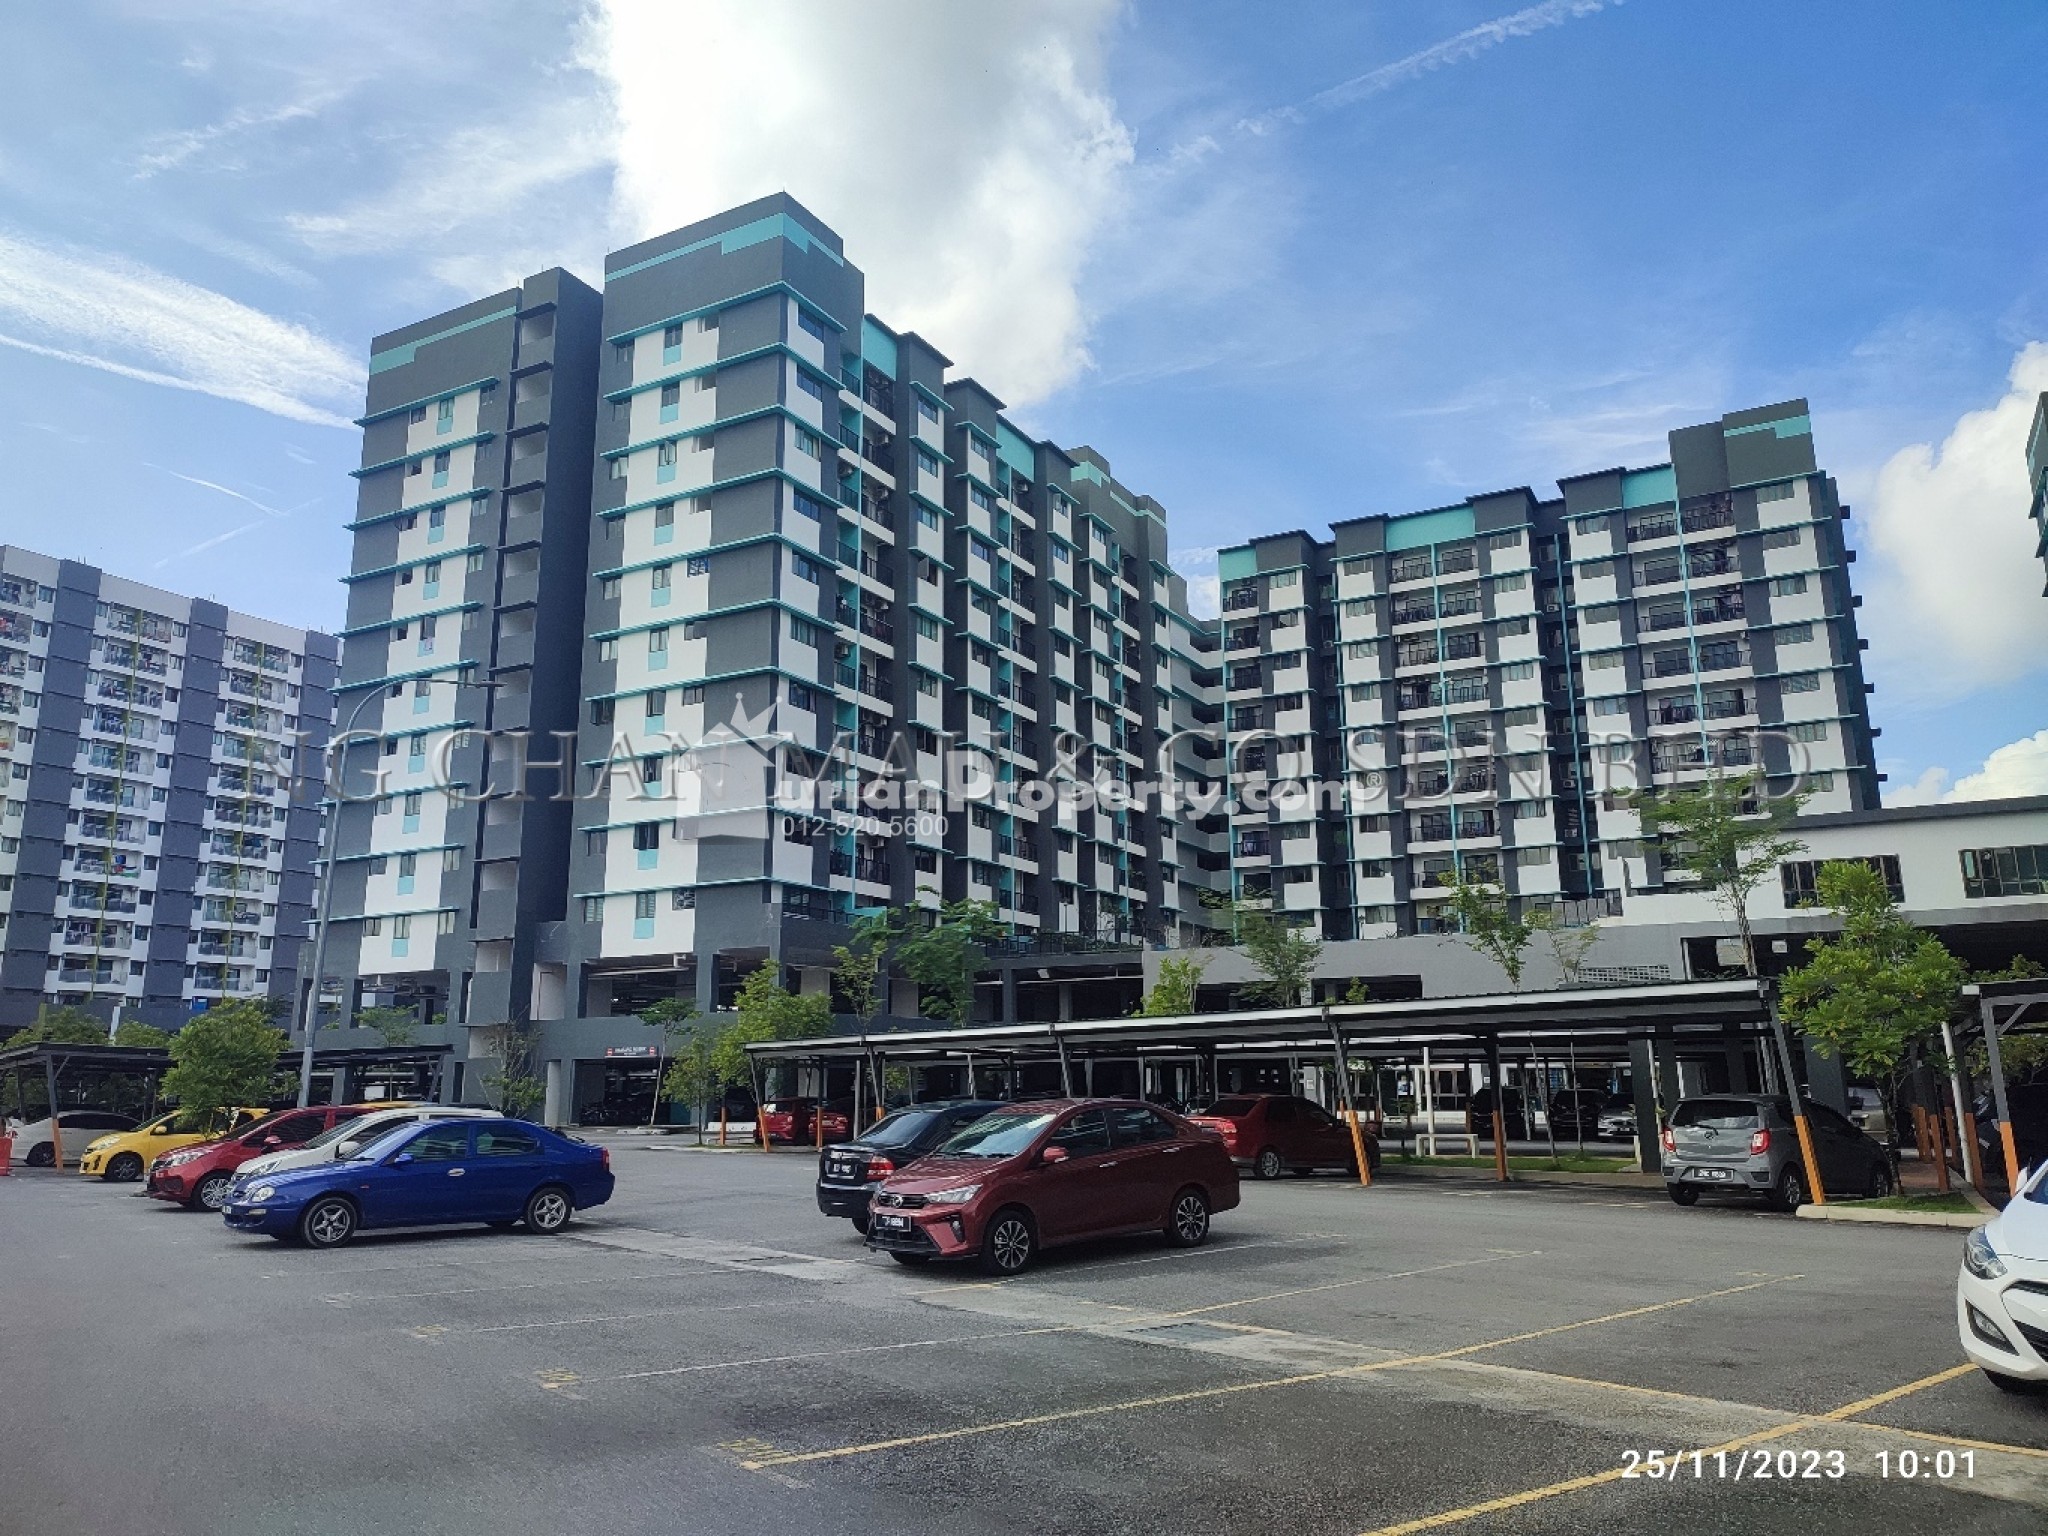 Condo For Auction at Taman Zamrud